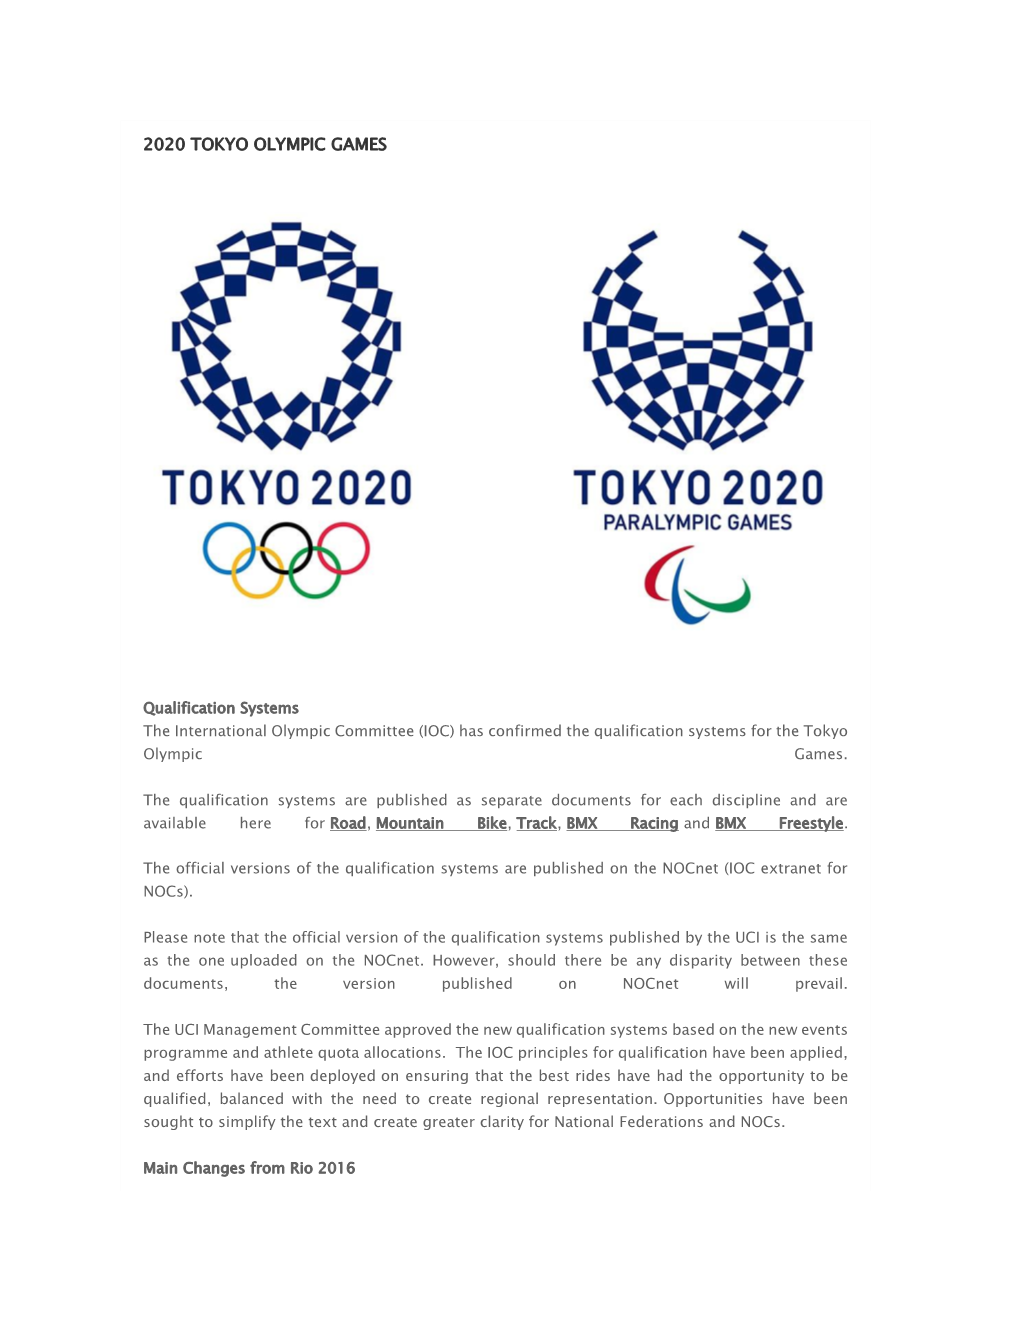 IOC Has Confirmed the Qualification Systems for the Tokyo Olympic Games